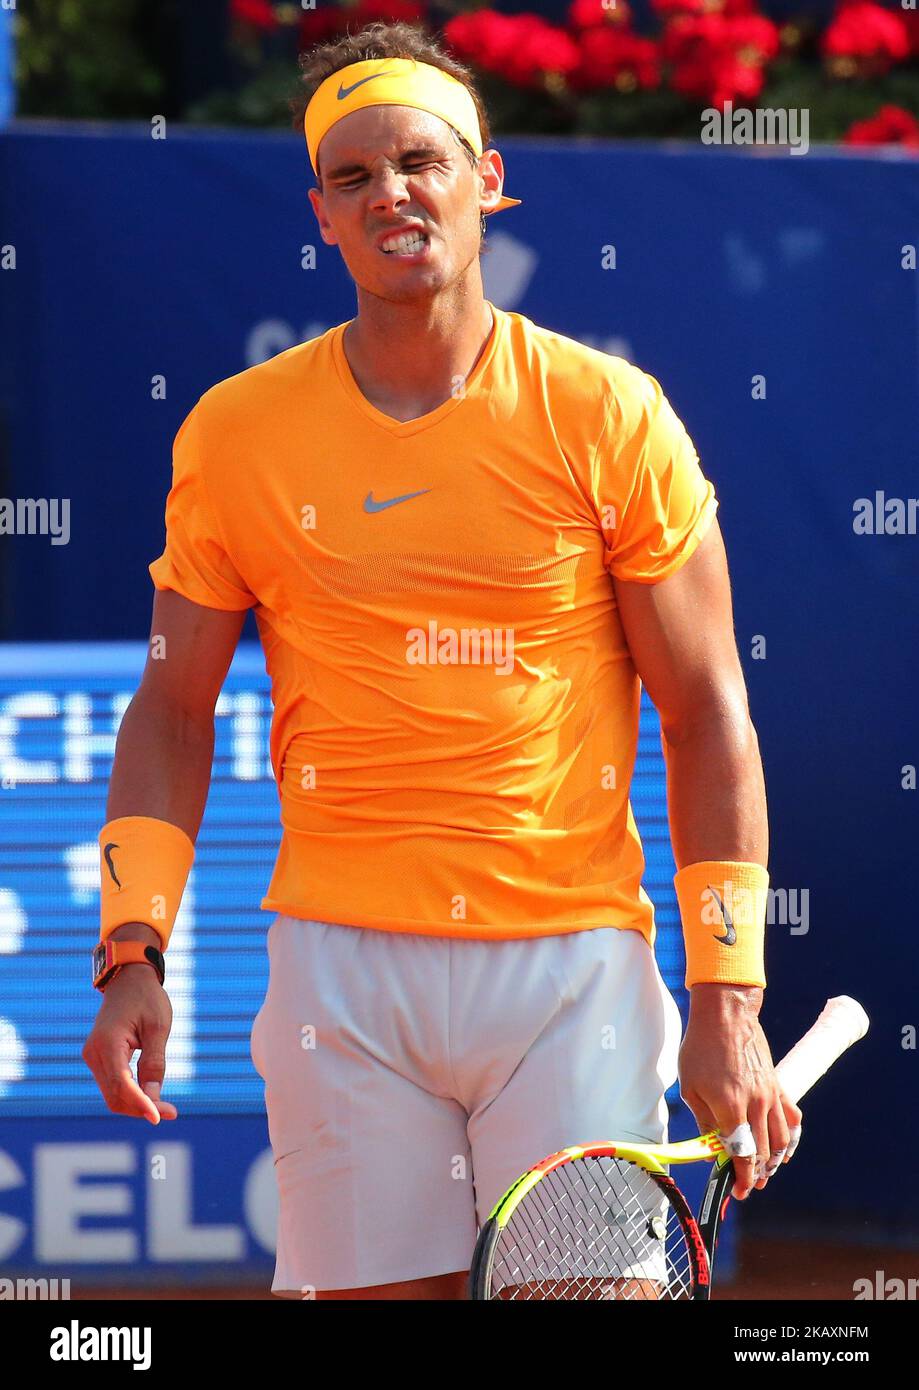 Rafa Nadal during the match between Guillermo Garcia Lopez during the Barcelona Open Banc Sabadell, on 26th April 2018 in Barcelona, Spain. -- (Photo by Urbanandsport/NurPhoto) Stock Photo